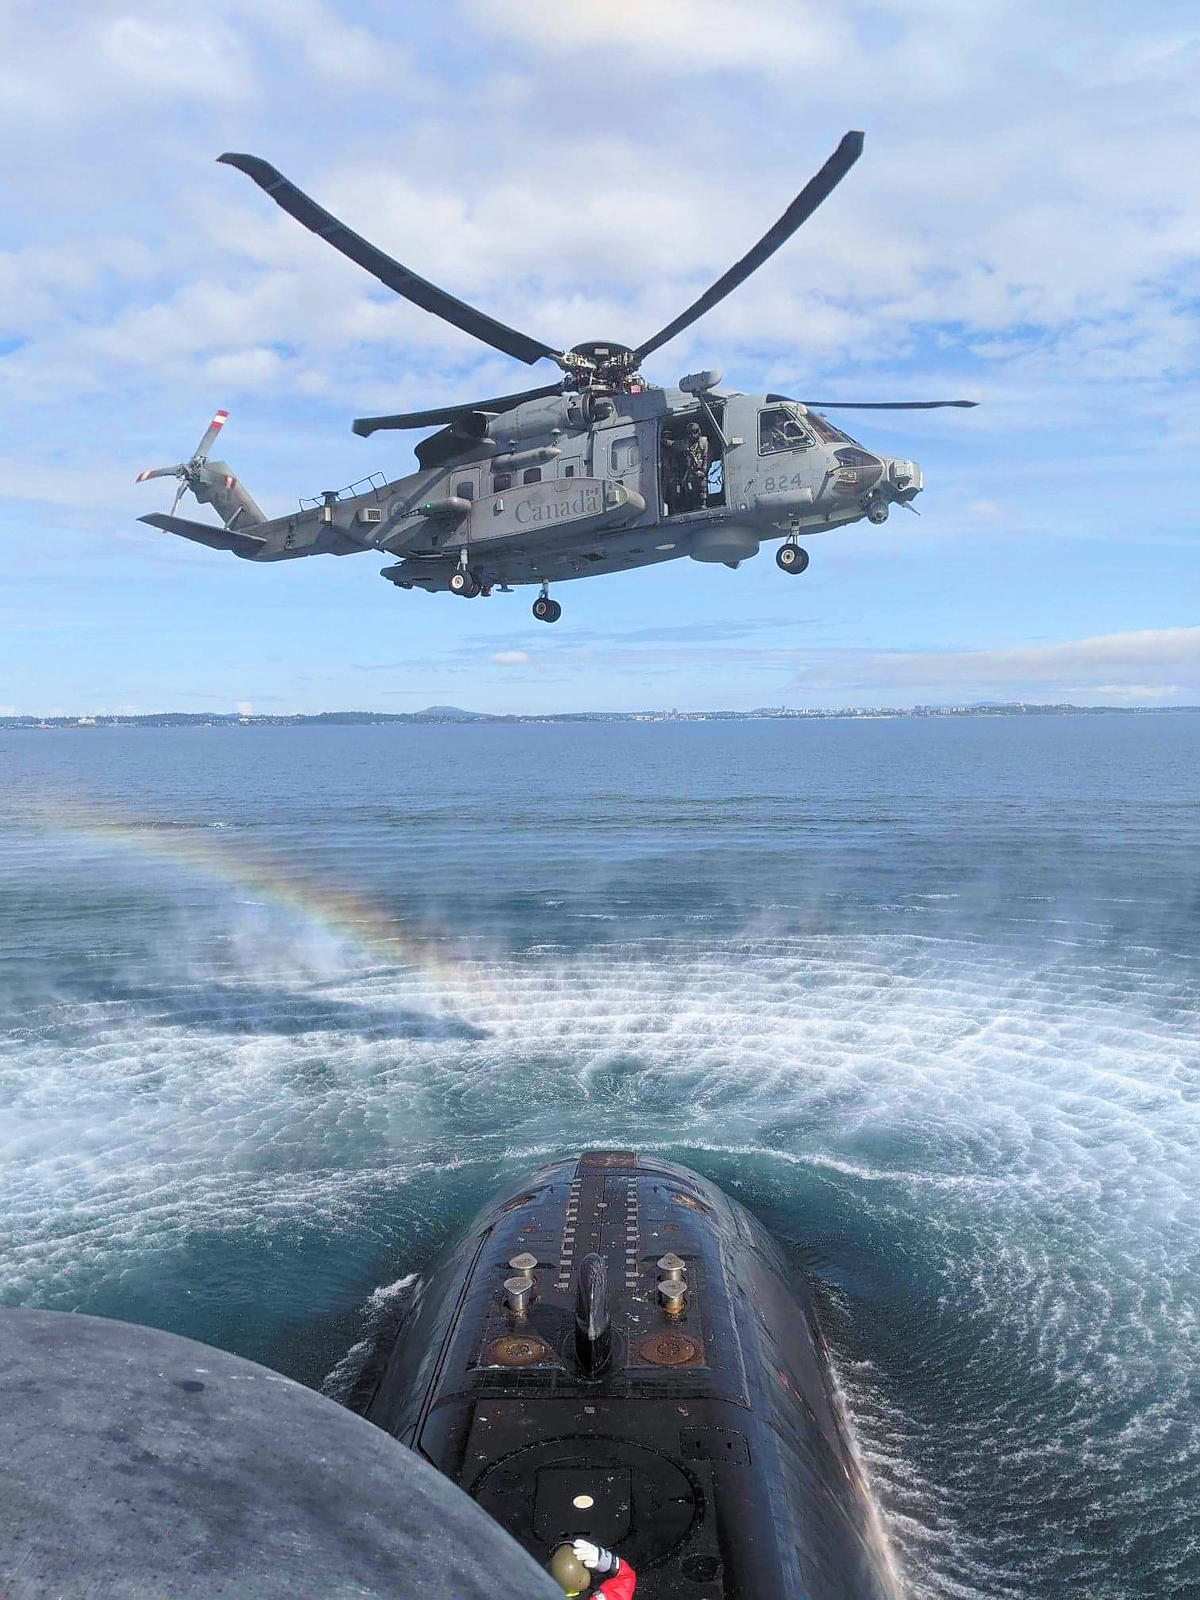 A CH-148 Cyclone helicopter conducts a training exercise with HMCS Victoria on Sept. 22. The submarine commenced sea trials on Sept. 18, marking its first time at sea since February 2015. Photo by LCdr H.T. Nguyen-Huynh, Executive Officer, HMCS Victoria